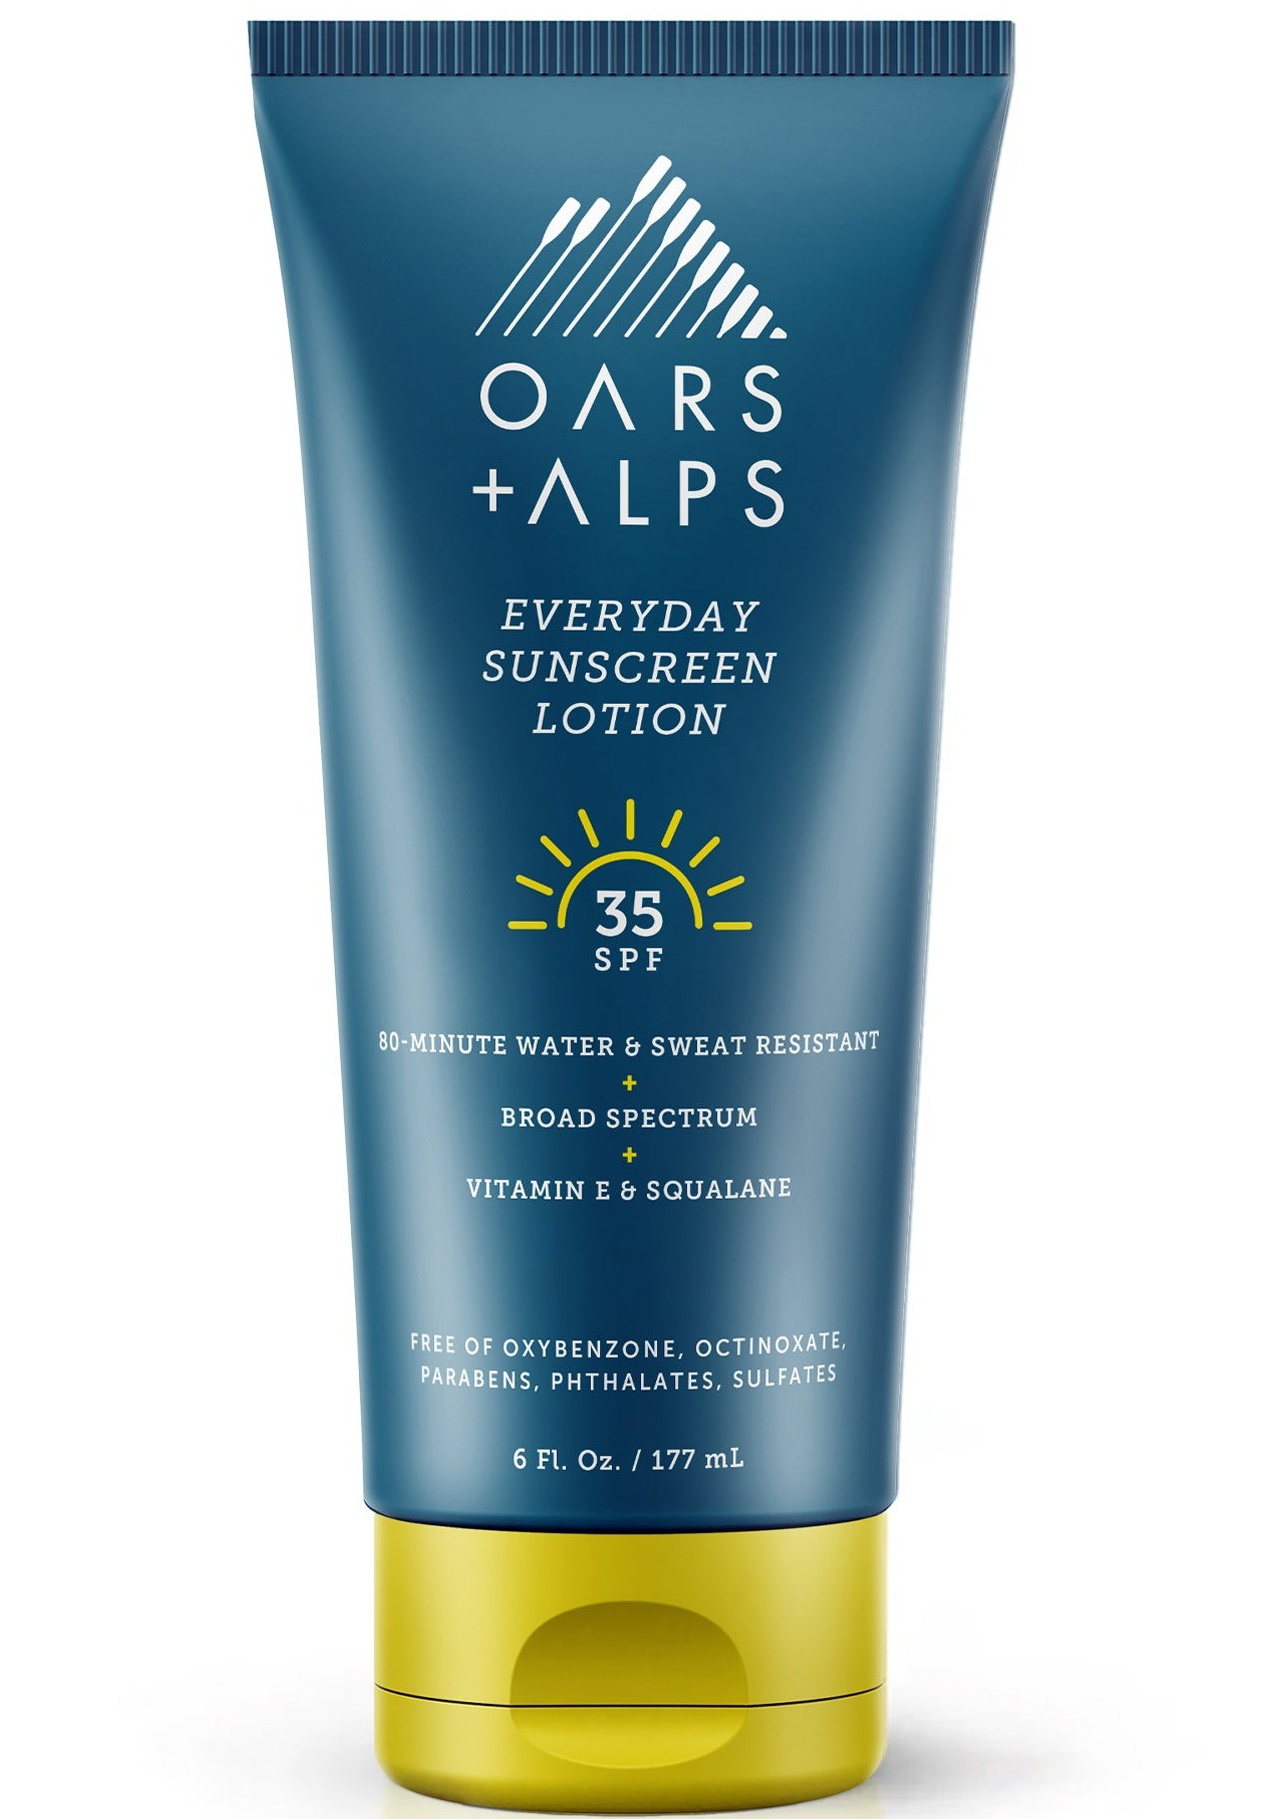 Oars + Alps Everyday SPF 35 Sunscreen Body Lotion